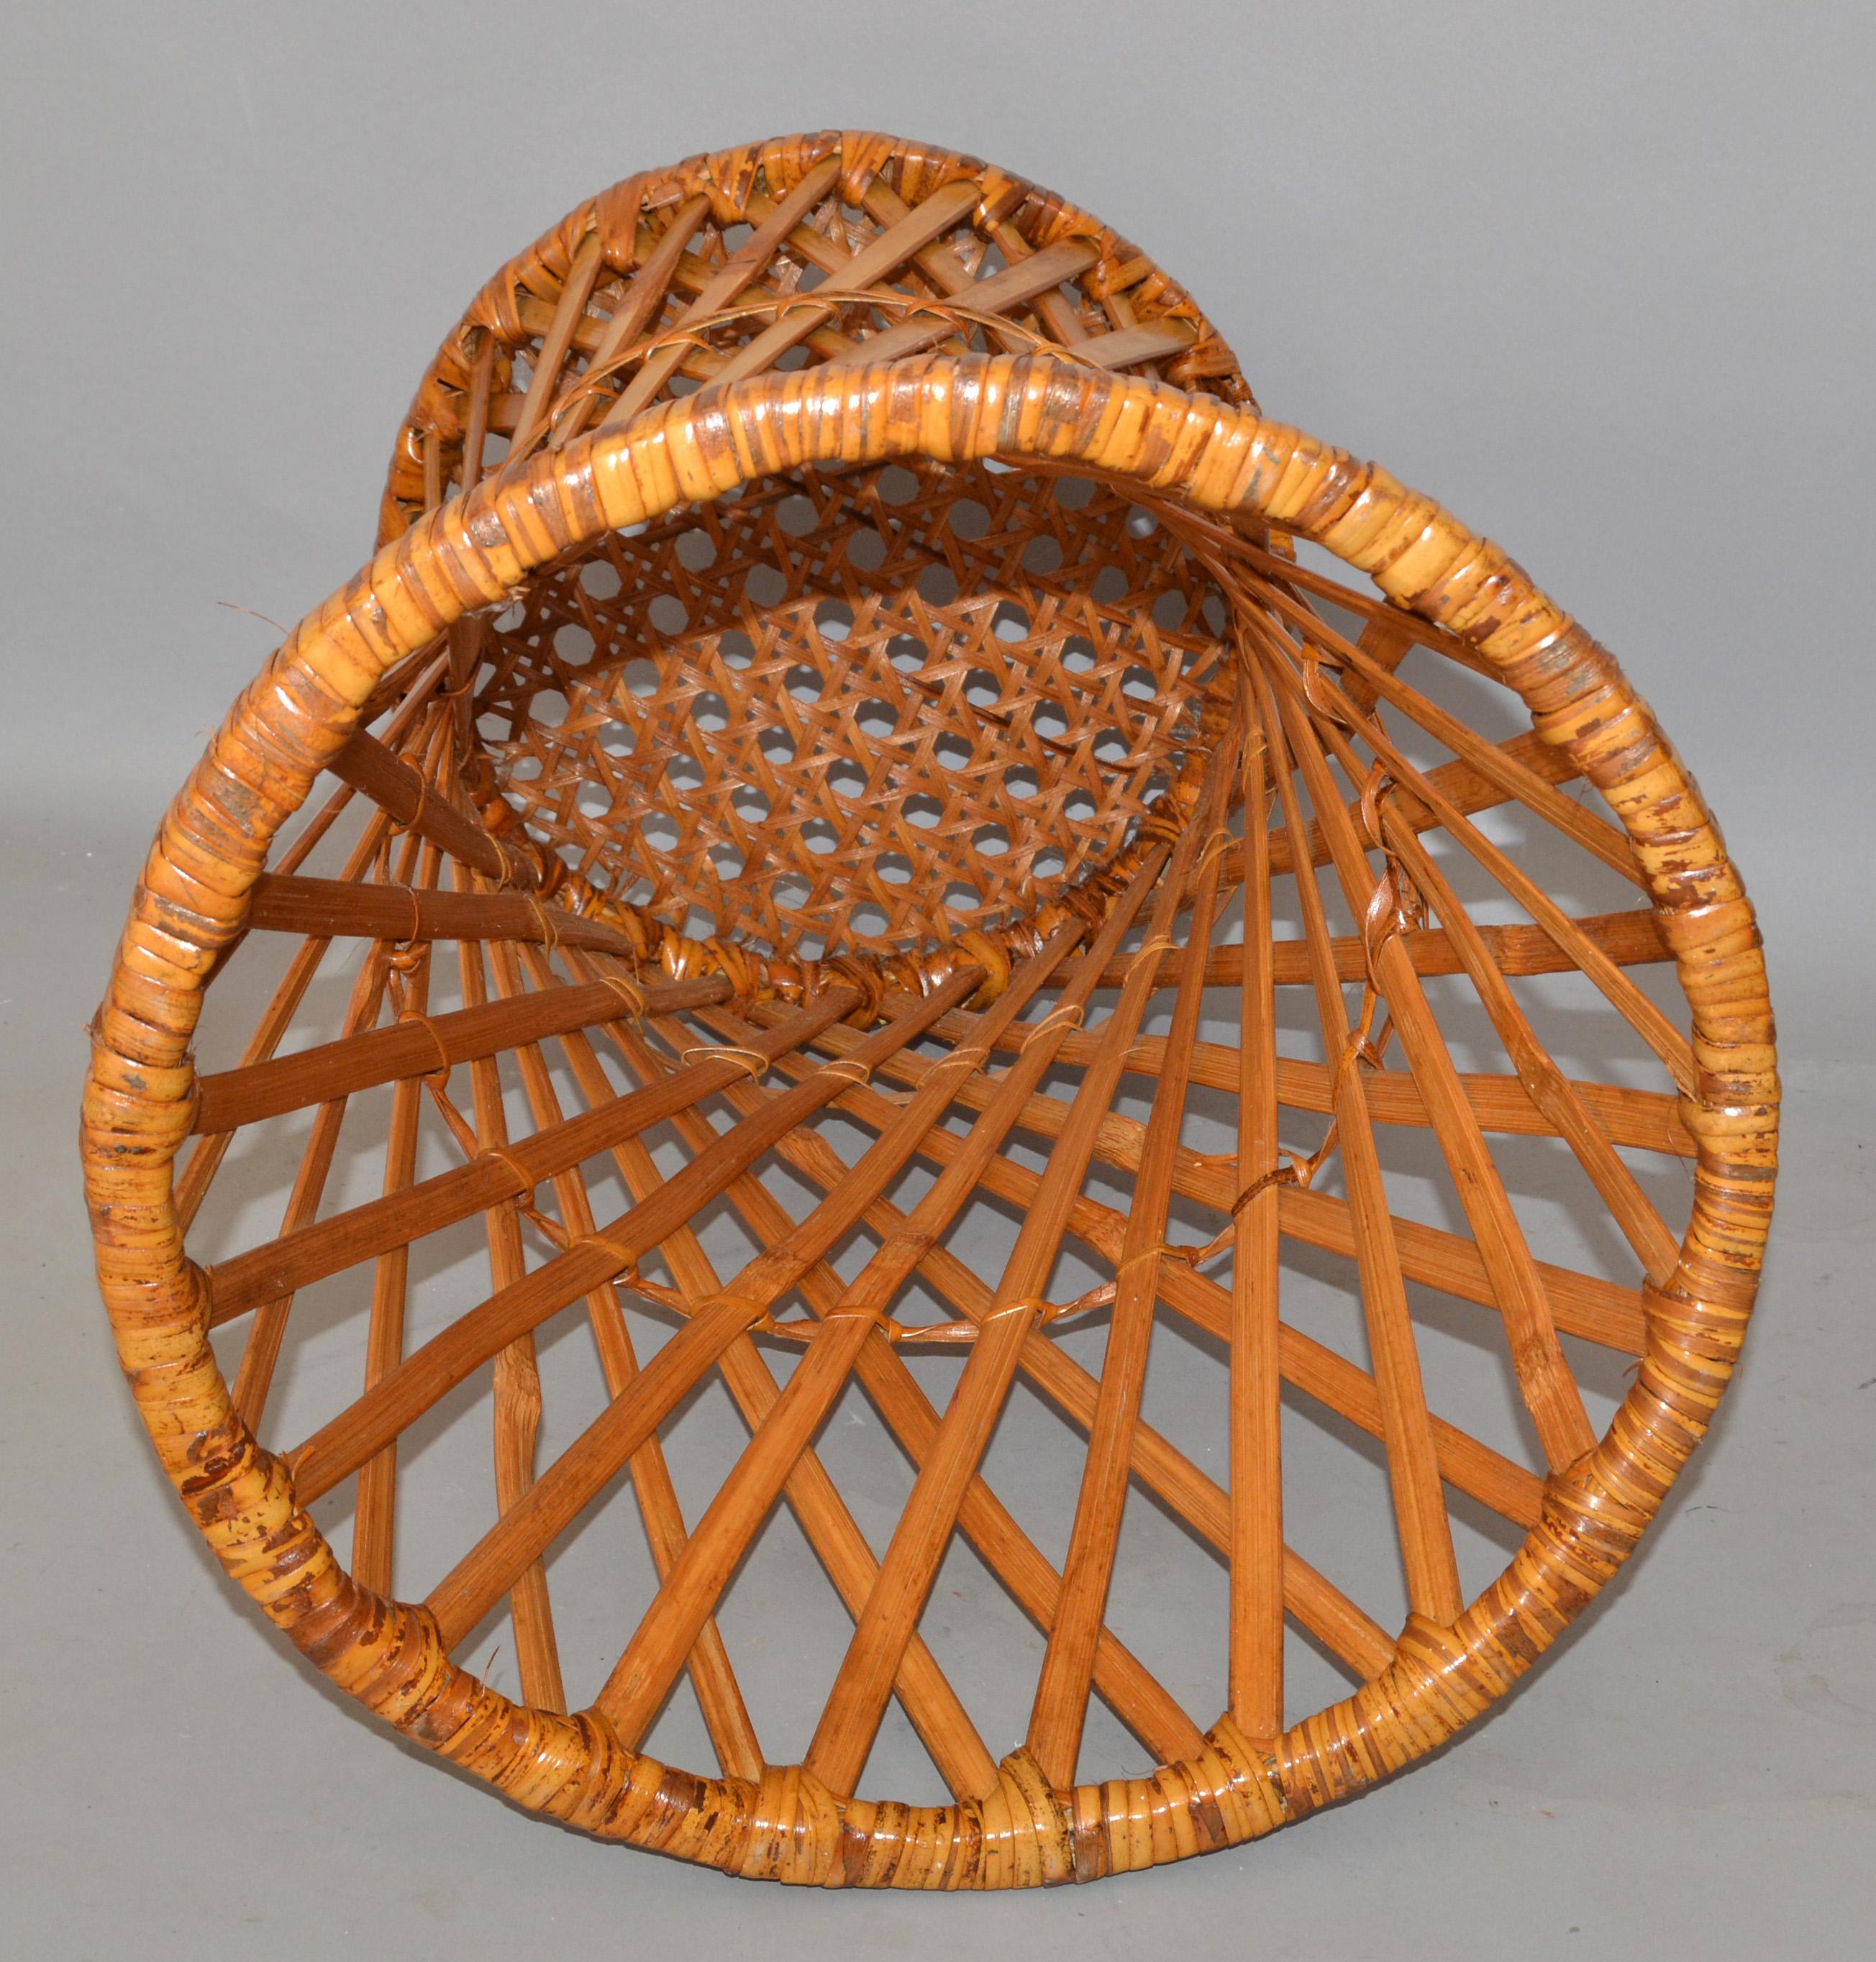 Wicker Vintage Midcentury Round Handwoven Rattan Cane Drum, Side, Drink Table Low Stool